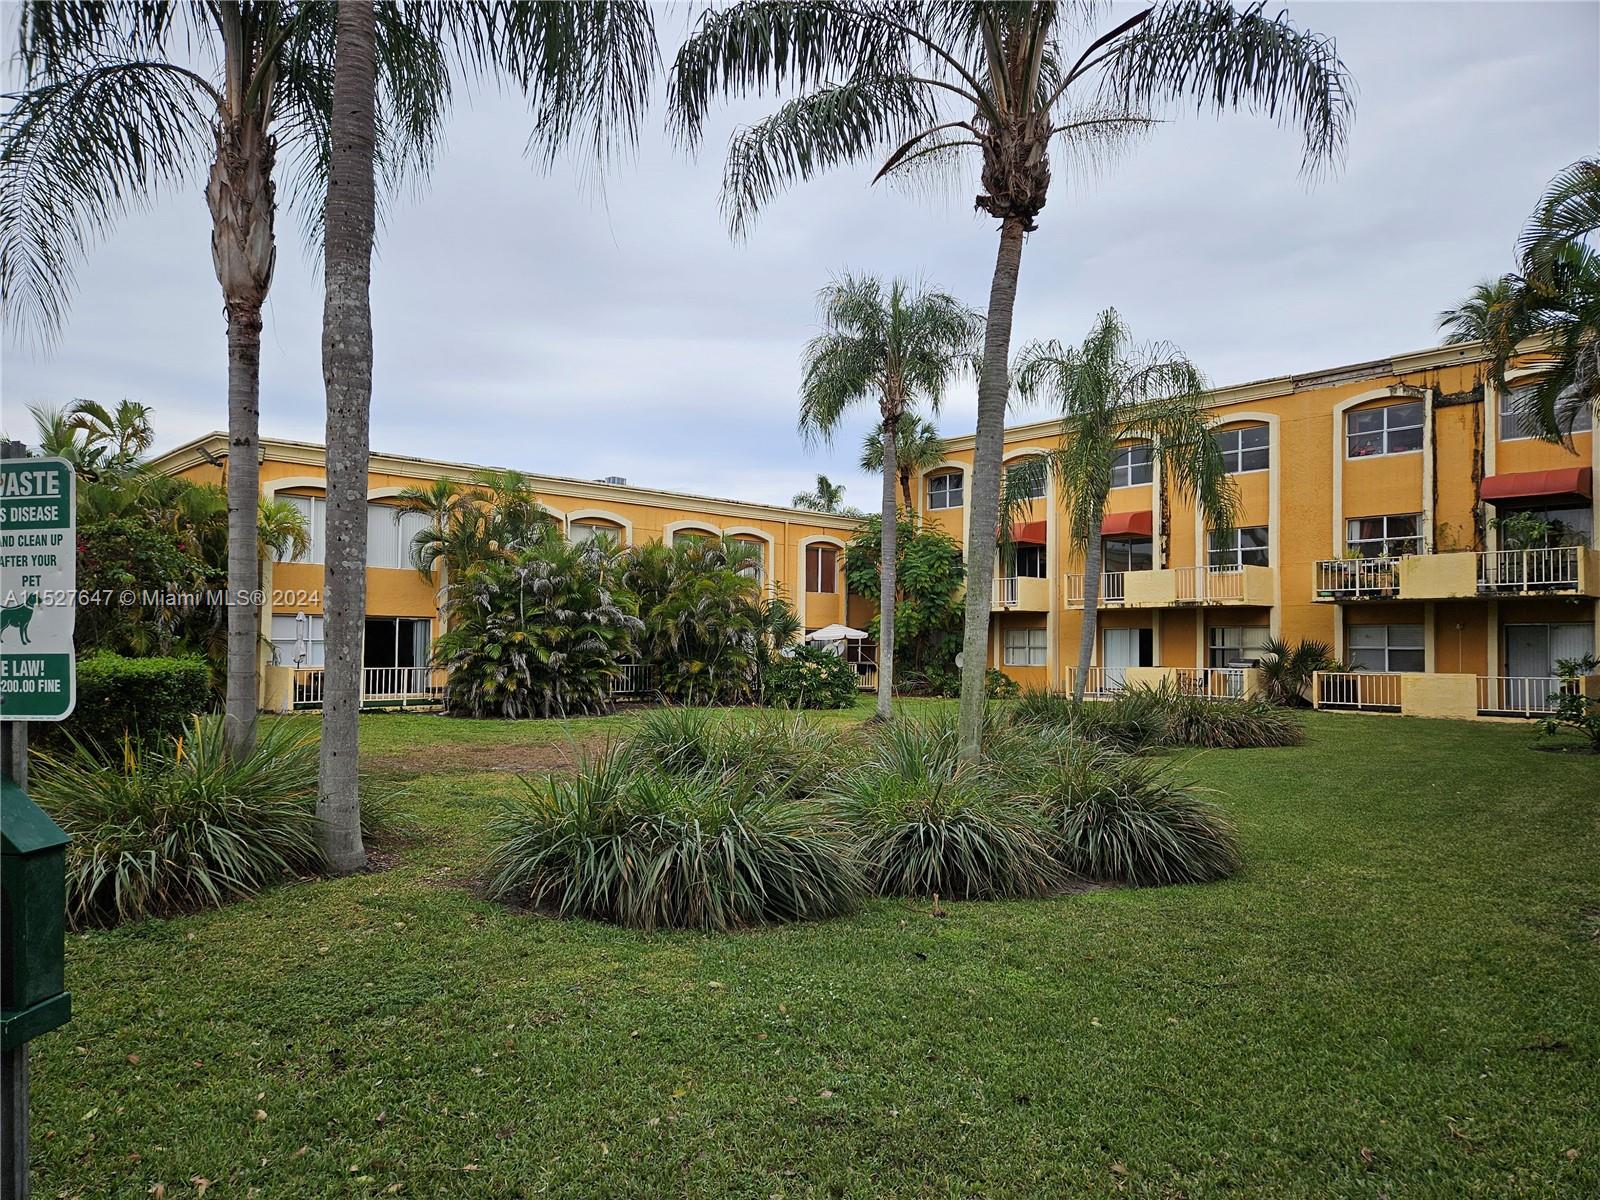 a view of a garden with a building and palm trees